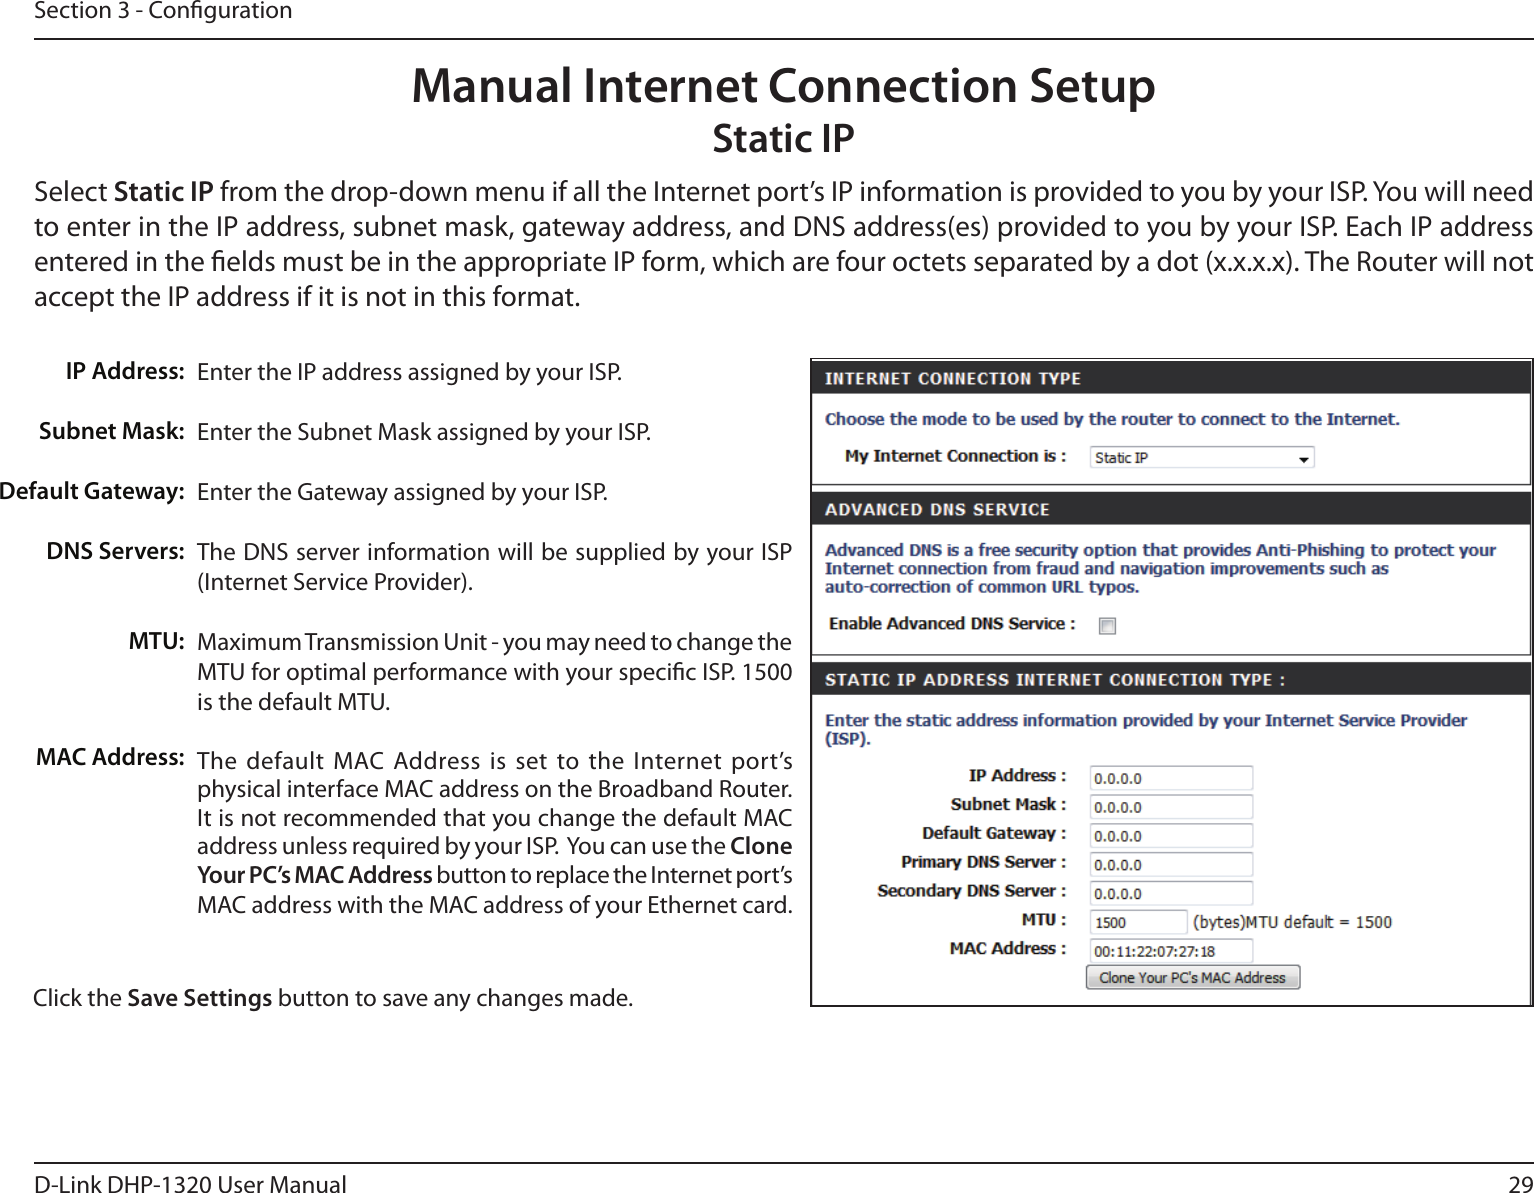 29D-Link DHP-1320 User ManualSection 3 - CongurationEnter the IP address assigned by your ISP.Enter the Subnet Mask assigned by your ISP.Enter the Gateway assigned by your ISP.The DNS server information will be supplied by your ISP (Internet Service Provider).Maximum Transmission Unit - you may need to change the MTU for optimal performance with your specic ISP. 1500 is the default MTU.The  default  MAC  Address  is  set  to  the  Internet  port’s physical interface MAC address on the Broadband Router. It is not recommended that you change the default MAC address unless required by your ISP.  You can use the Clone Your PC’s MAC Address button to replace the Internet port’s MAC address with the MAC address of your Ethernet card.IP Address:Subnet Mask:Default Gateway:DNS Servers:MTU:MAC Address:Manual Internet Connection SetupStatic IPSelect Static IP from the drop-down menu if all the Internet port’s IP information is provided to you by your ISP. You will need to enter in the IP address, subnet mask, gateway address, and DNS address(es) provided to you by your ISP. Each IP address entered in the elds must be in the appropriate IP form, which are four octets separated by a dot (x.x.x.x). The Router will not accept the IP address if it is not in this format.Click the Save Settings button to save any changes made.